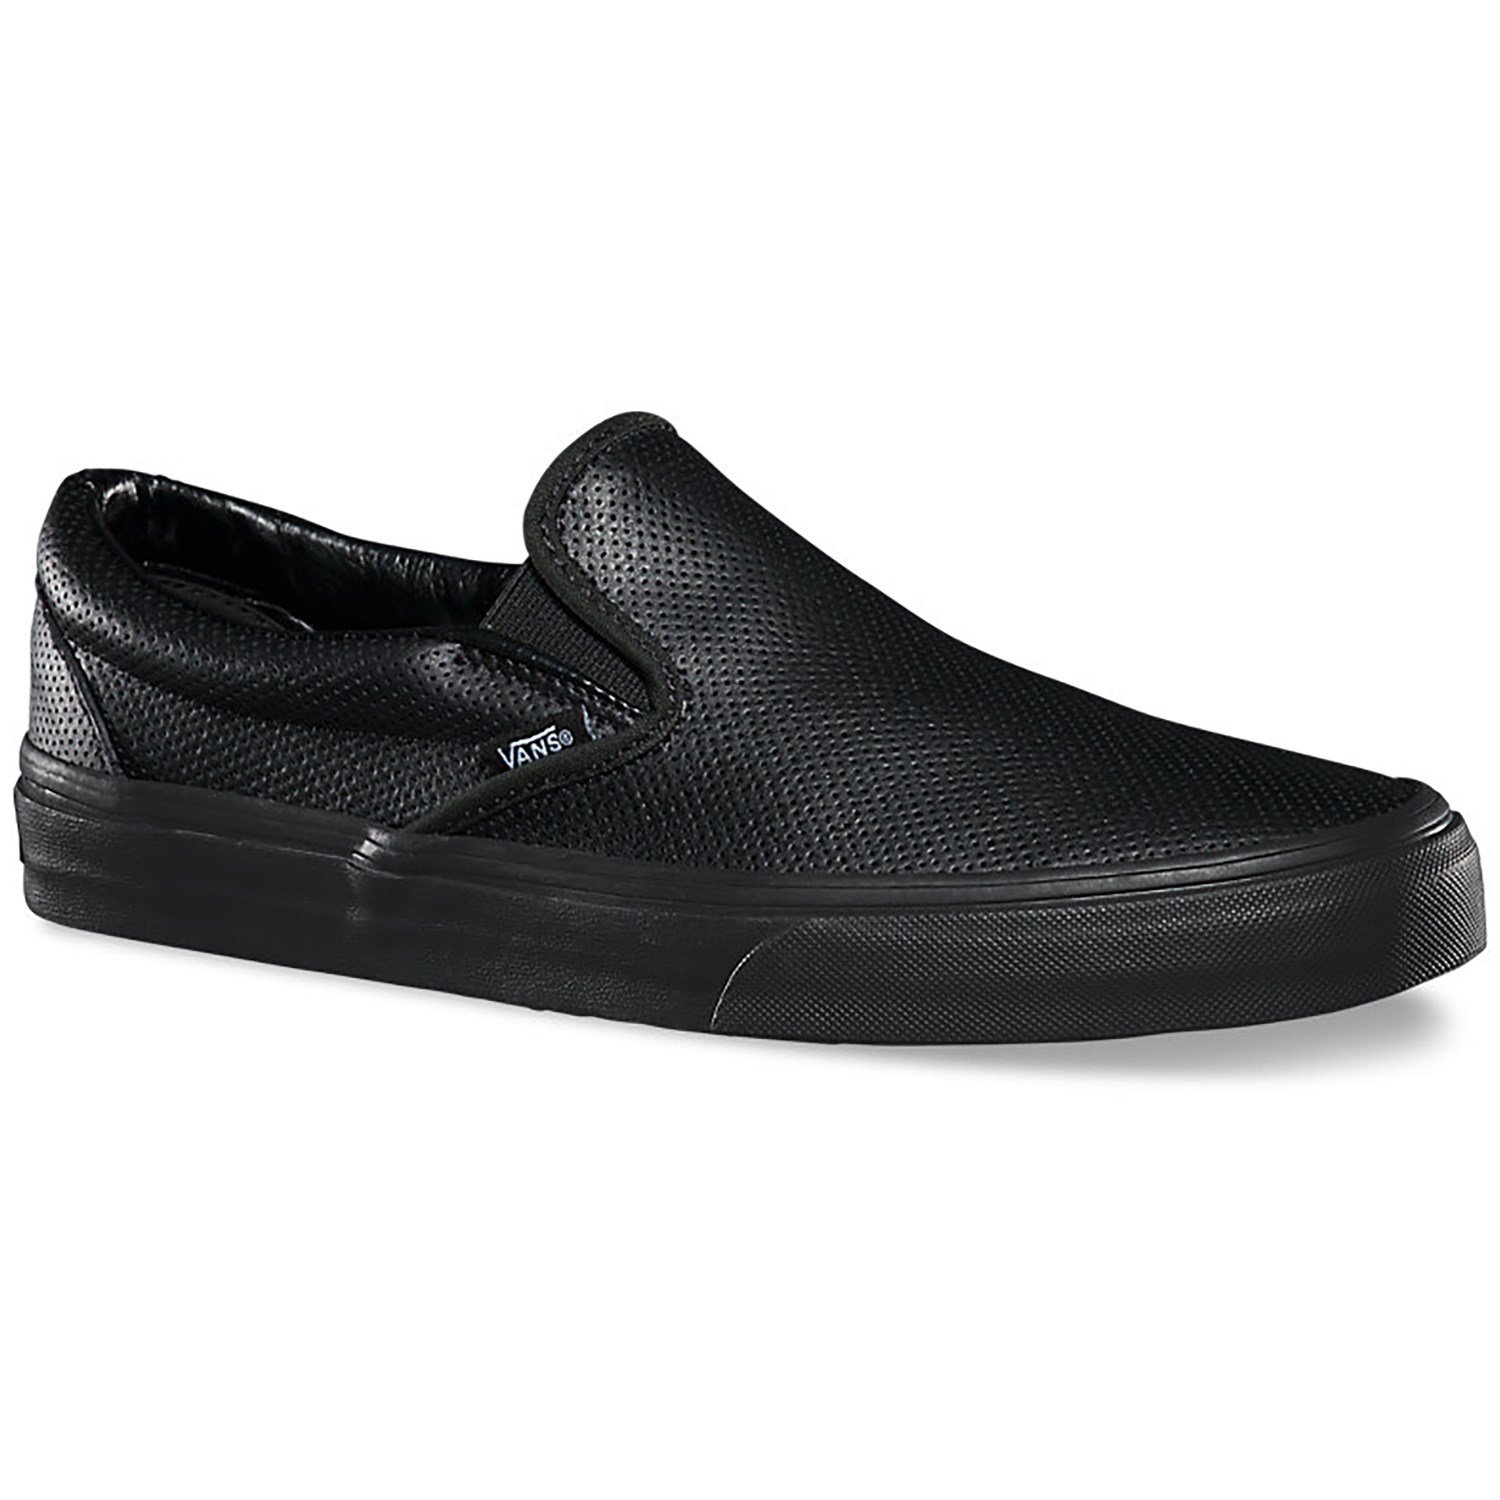 Vans Classic Perf Leather Slip-On Shoes 